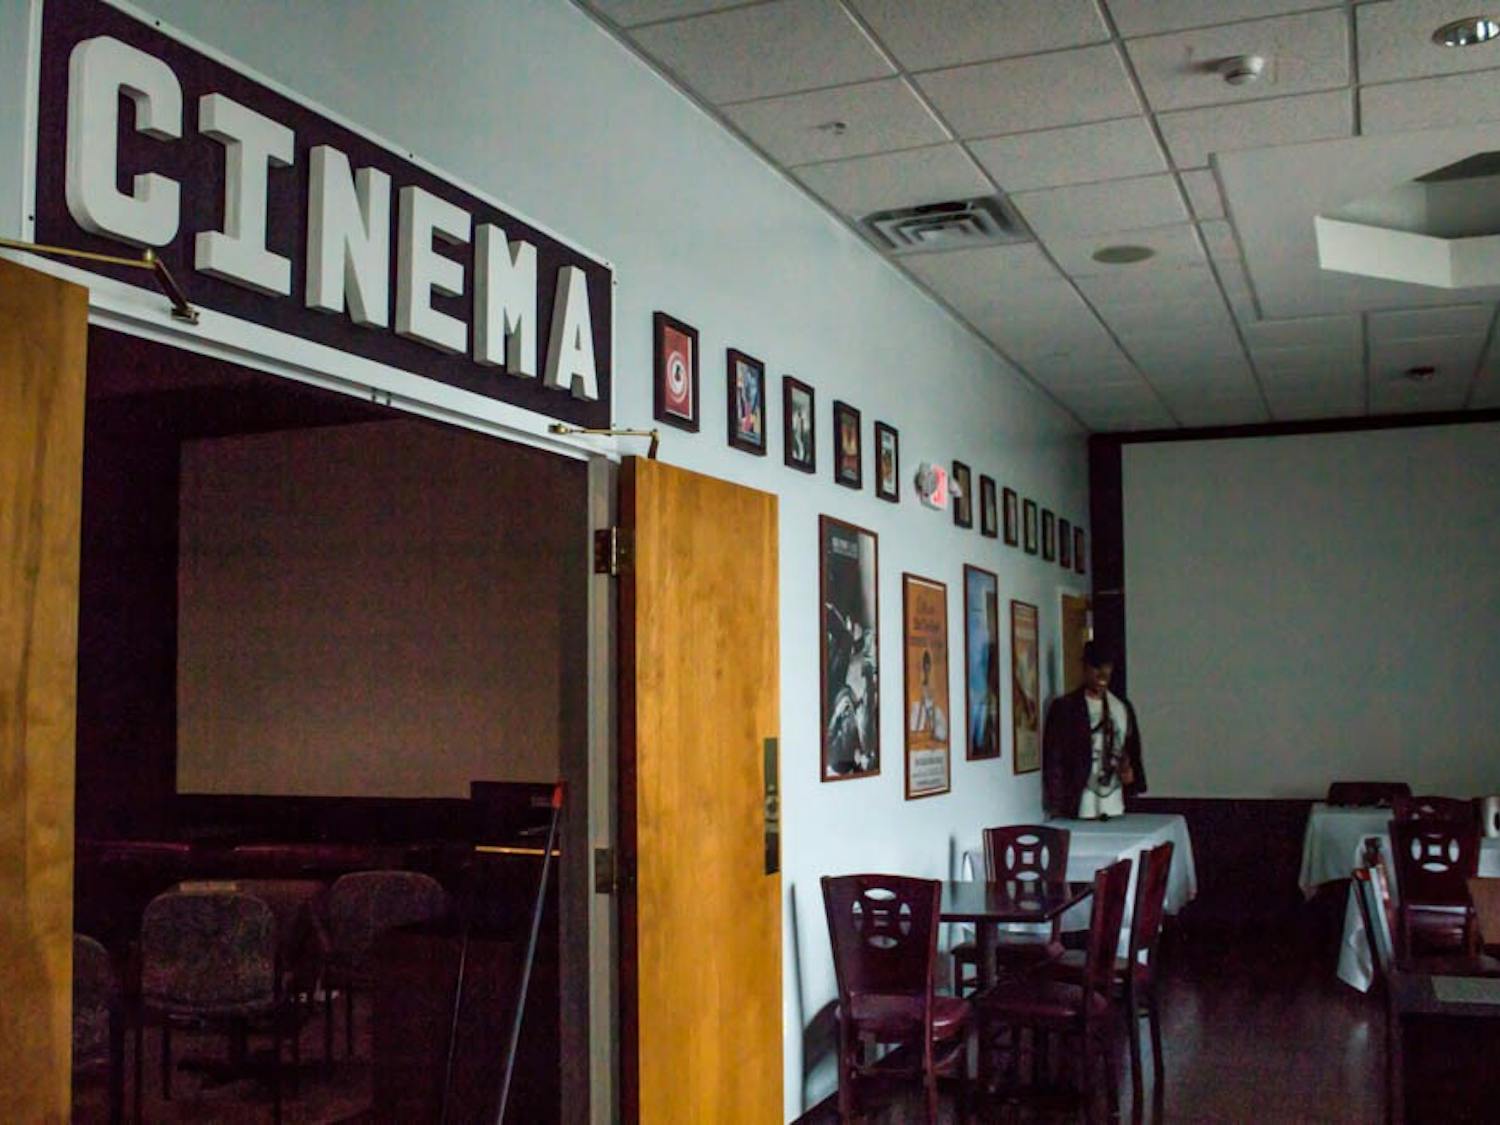 The Screening Room offers a great atmosphere for anyone looking to grab dinner and a movie. Playing old and new movies, there’s something for everyone at this Buffalo hidden gem.&nbsp;